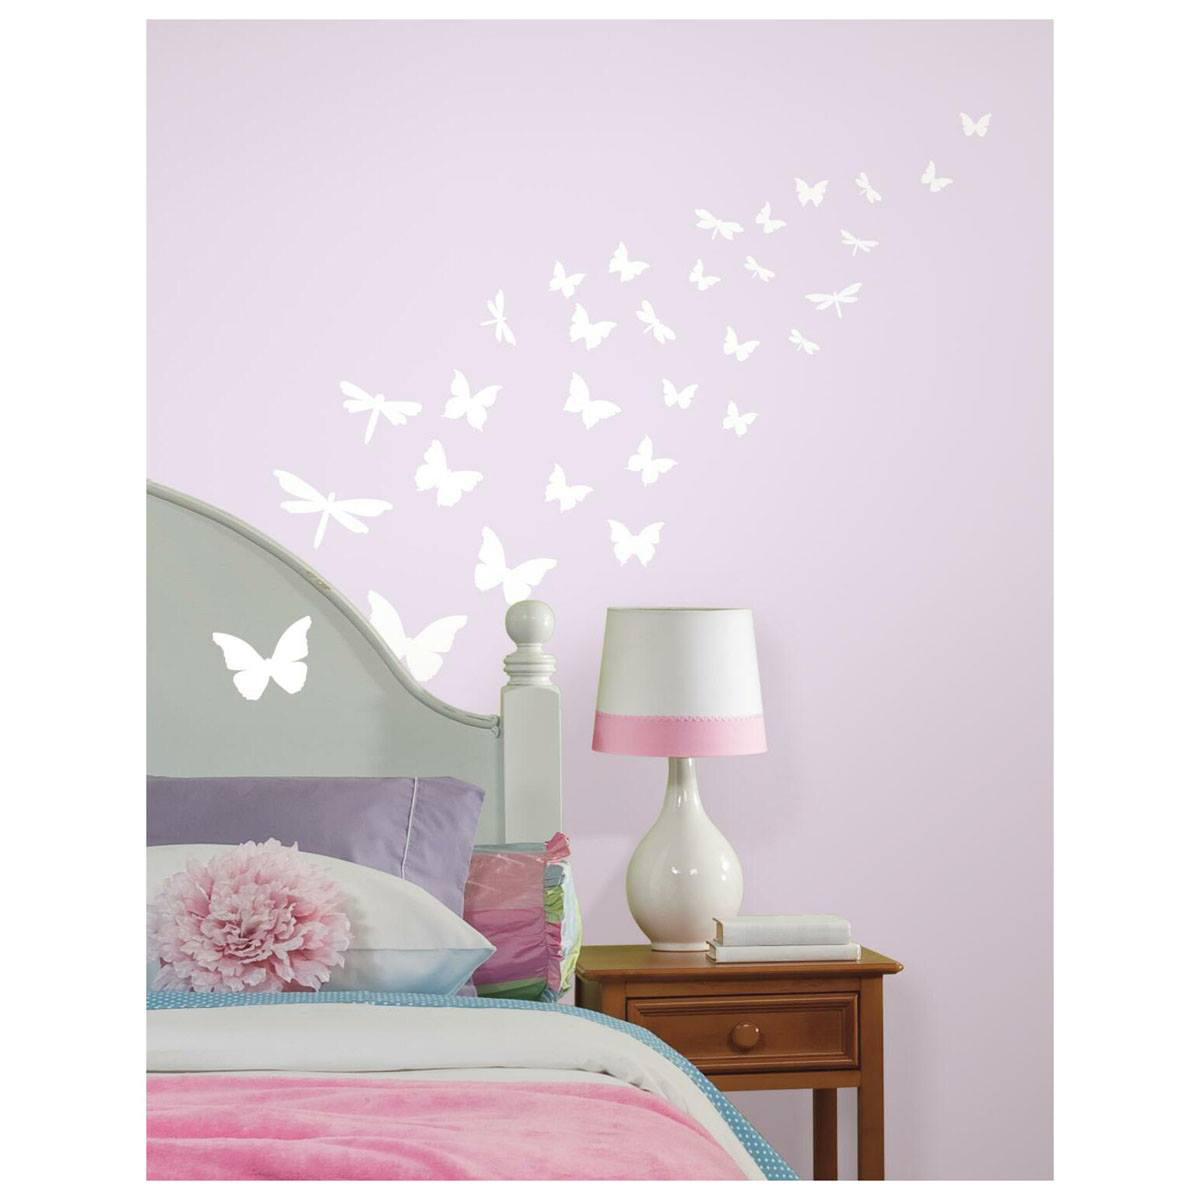 RoomMates(R) Butterfly & Dragonfly Peel & Stick Wall Decals